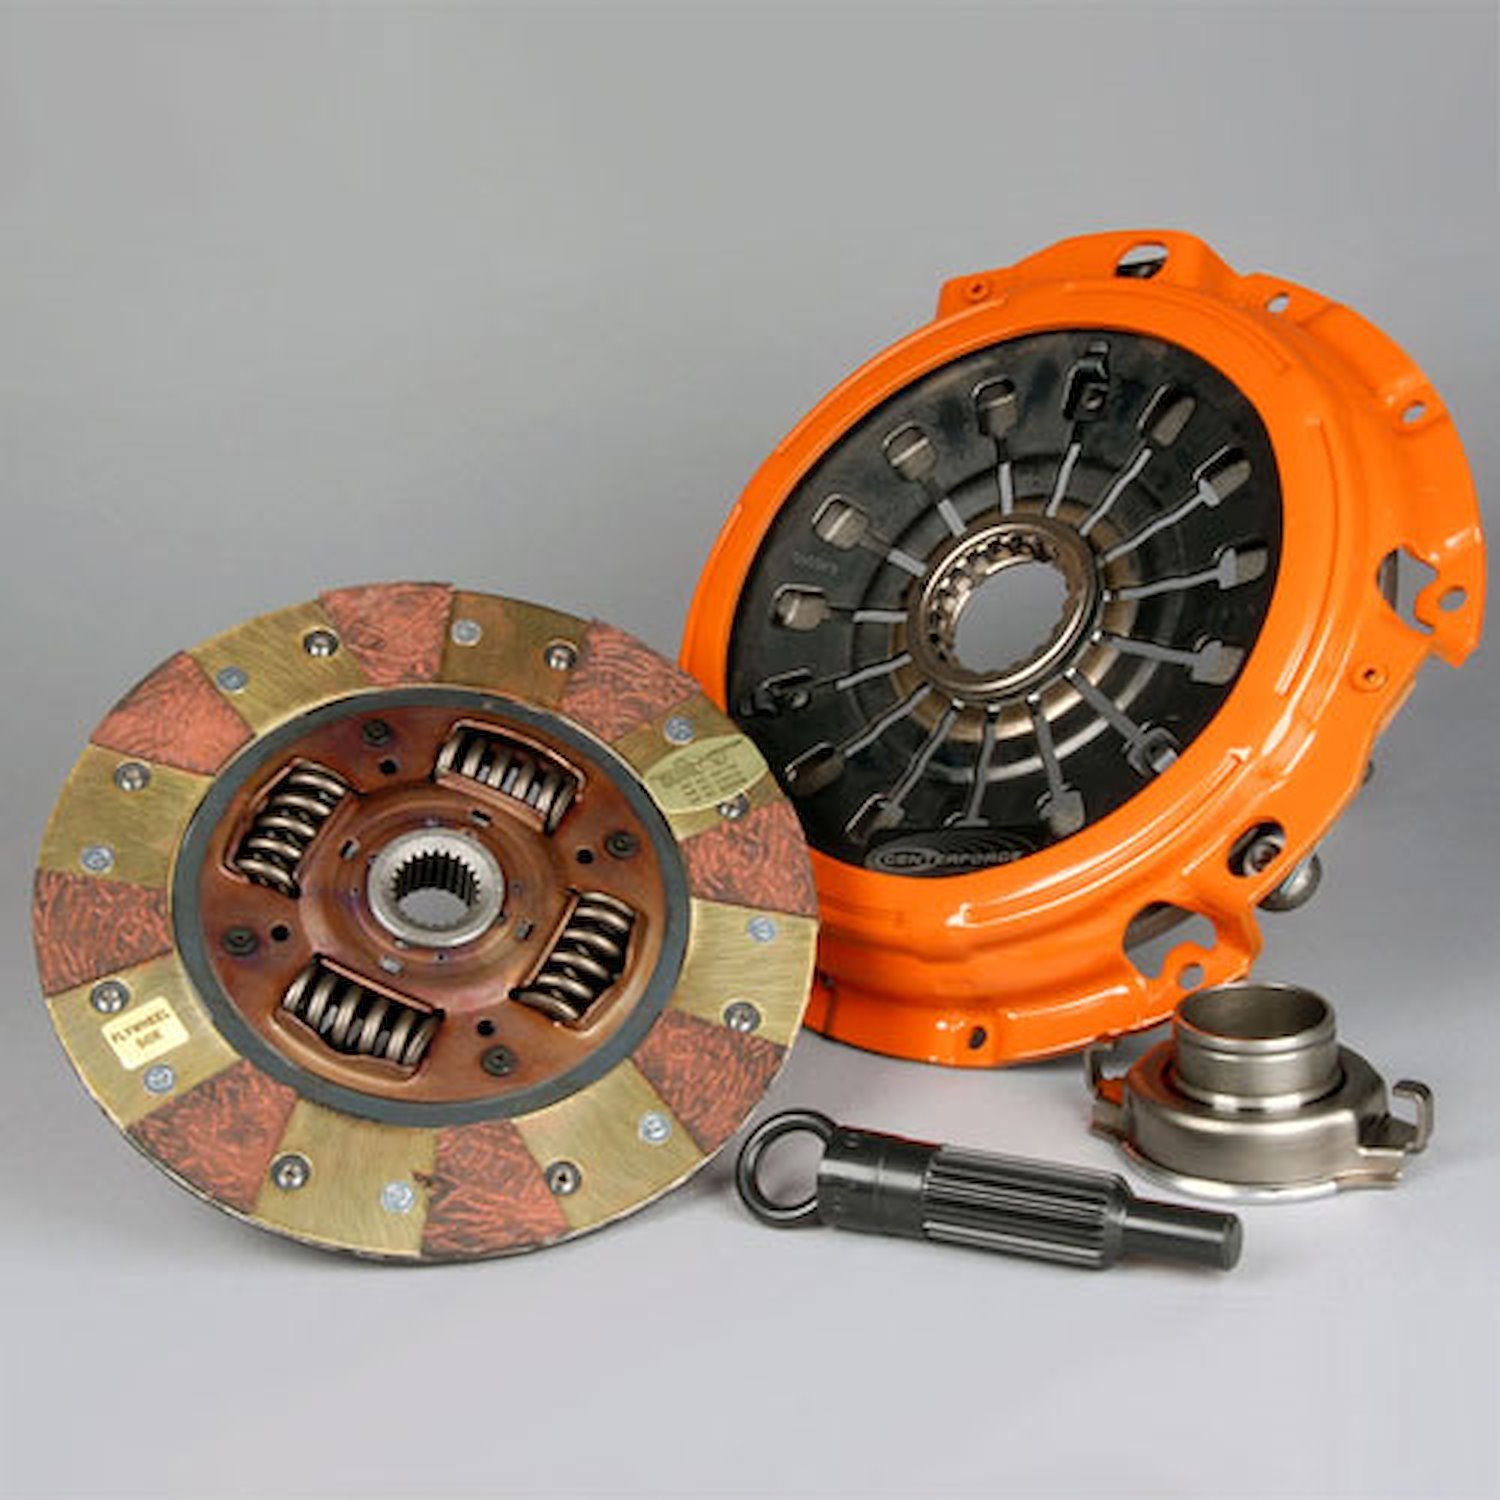 Dual Friction Clutch Includes Pressure Plate, Disc, Throwout Bearing, & Aligment Tool